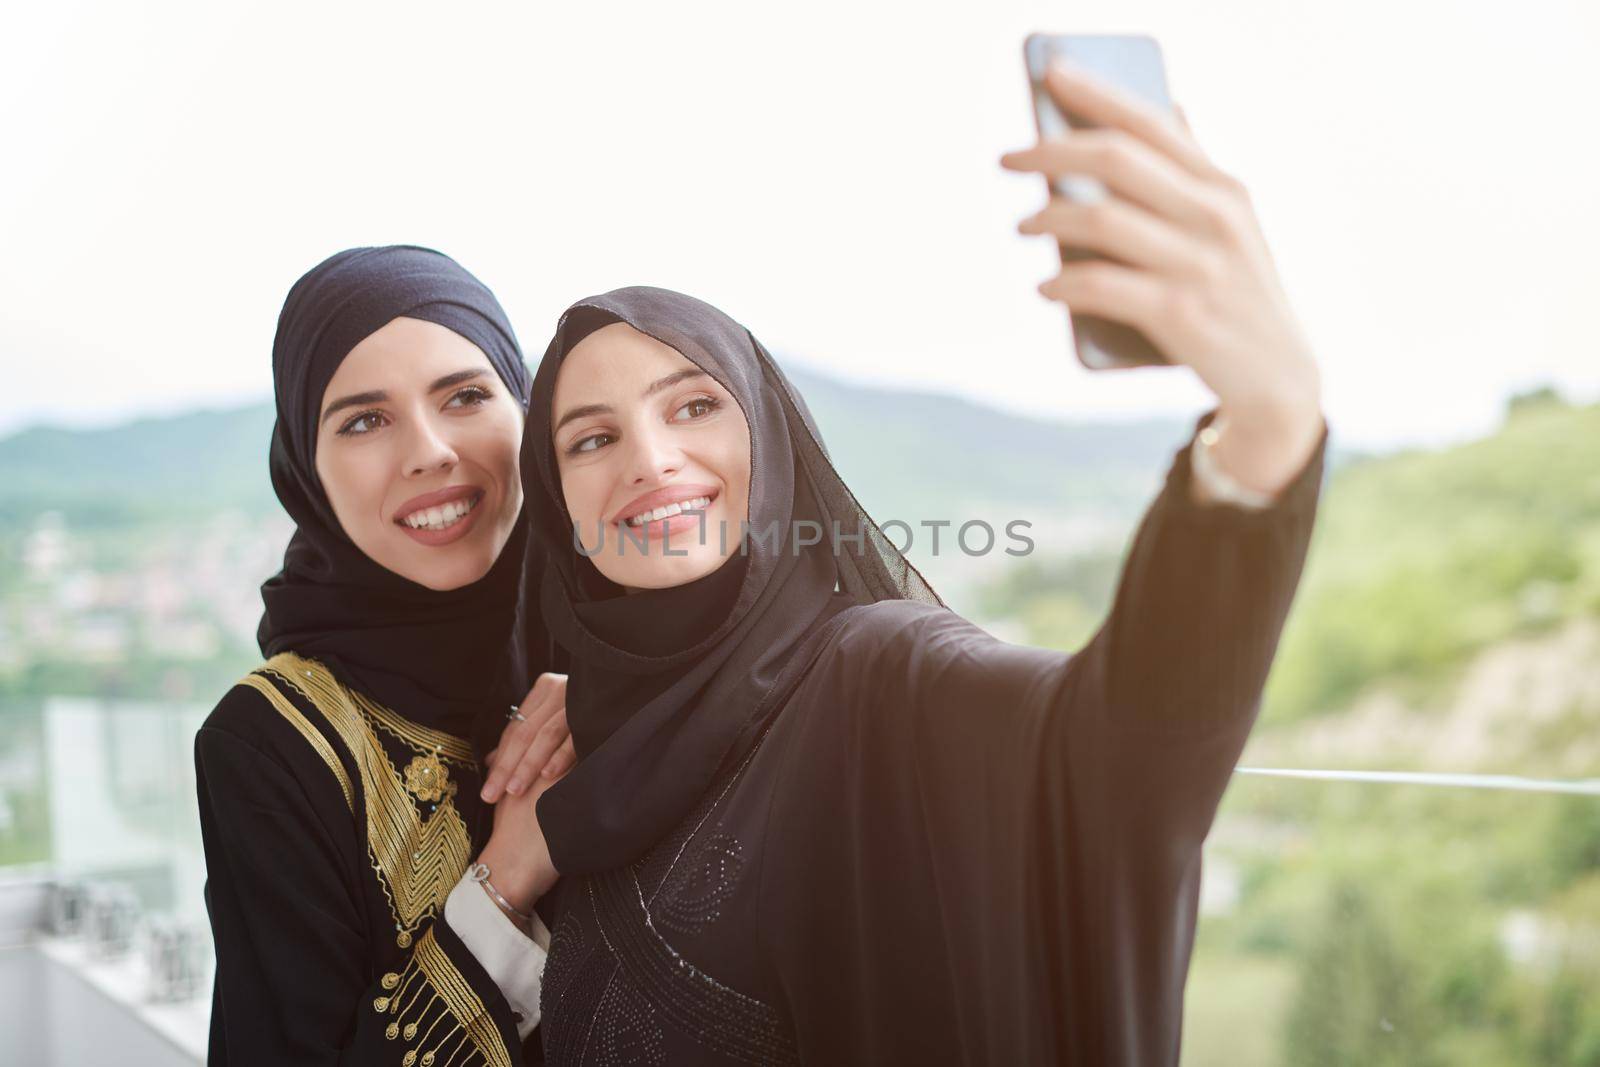 young beautiful muslim women in fashionable dress with hijab using mobile phone while taking selfie picture on the balcony representing modern islam fashion technology and ramadan kareem concept